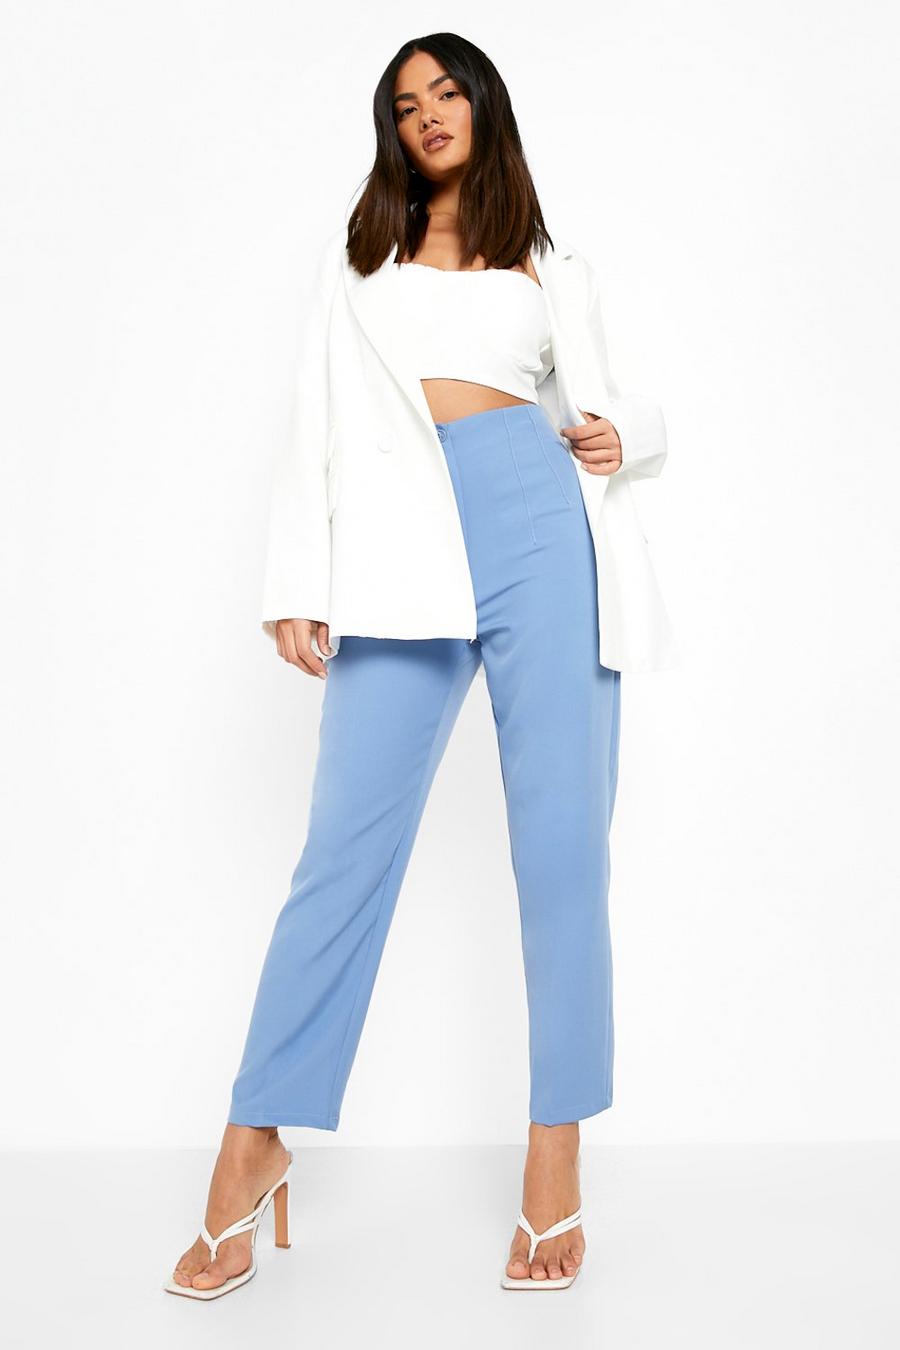 Pale blue High Waisted Tailored Cigarette Pants